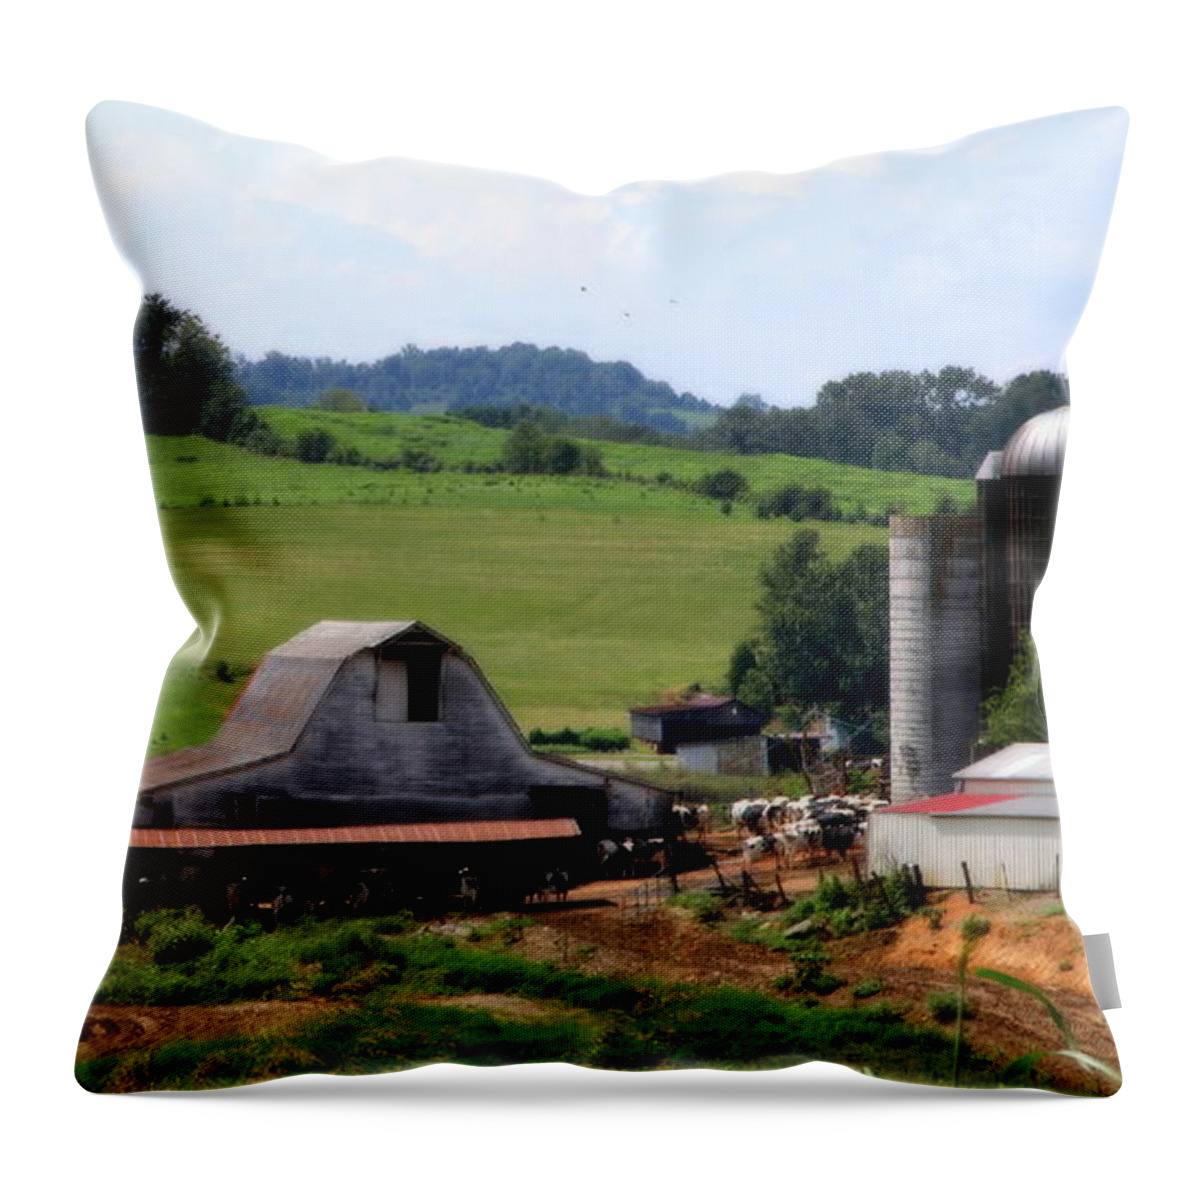 Barns Throw Pillow featuring the photograph Old Dairy Barn by Karen Wiles